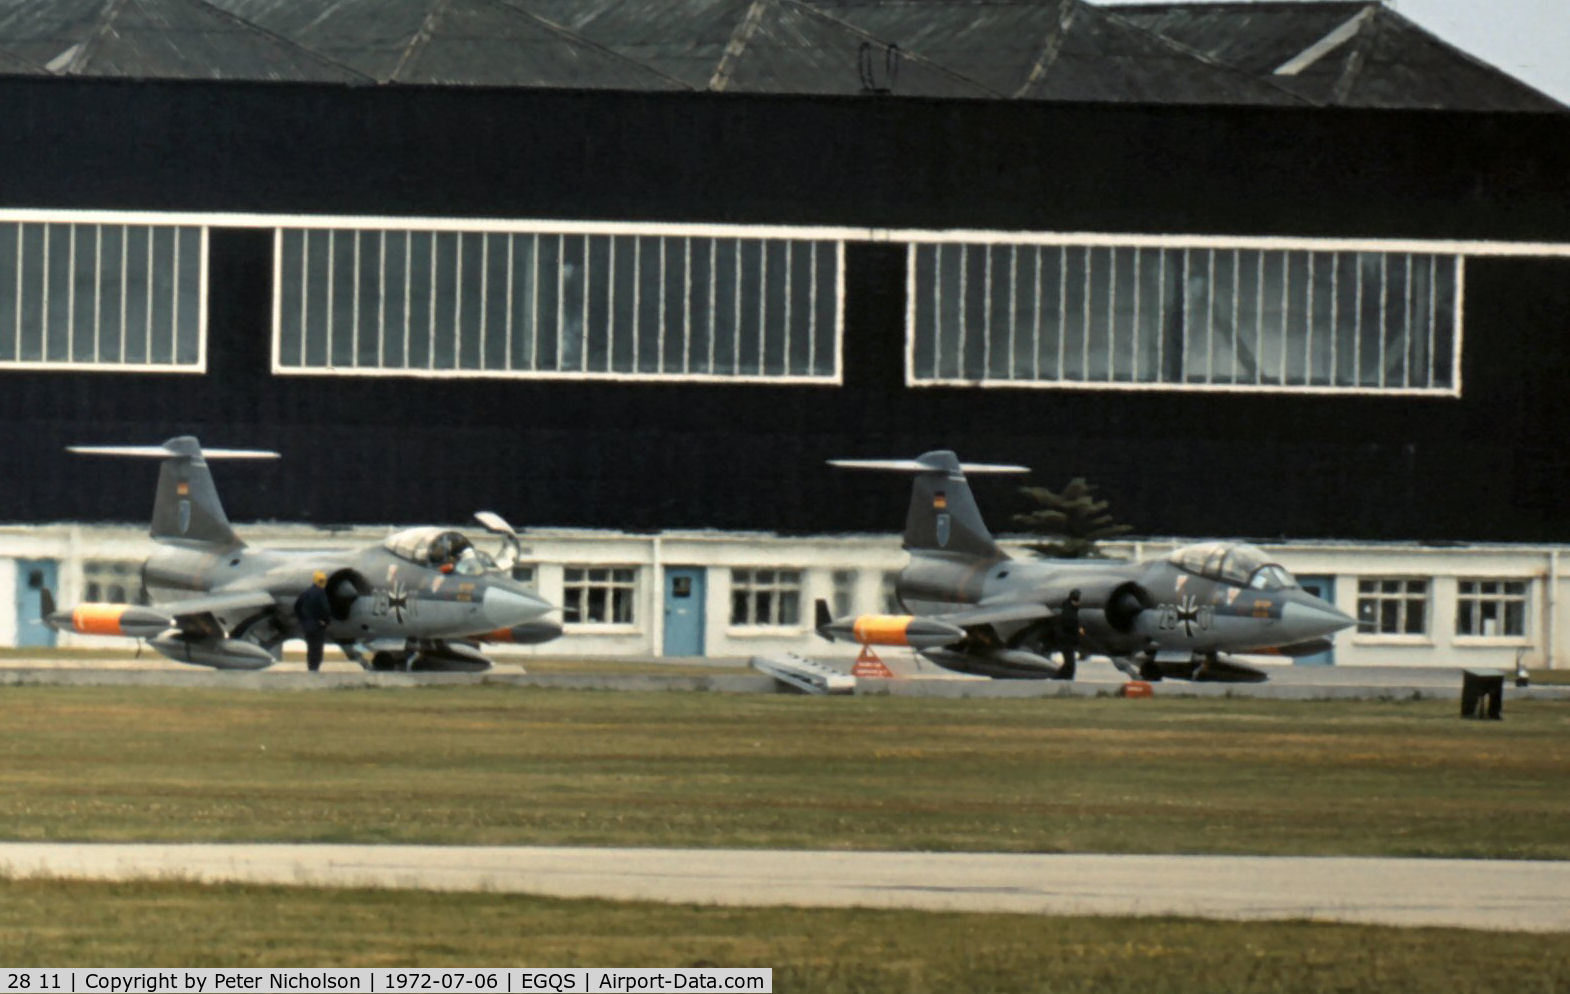 28 11, 1966 Lockheed TF-104G Starfighter C/N 583F-5941, TF-104G Starfighter of WS-10 German Air Force visiting RAF Lossiemouth in the Summer of 1972.